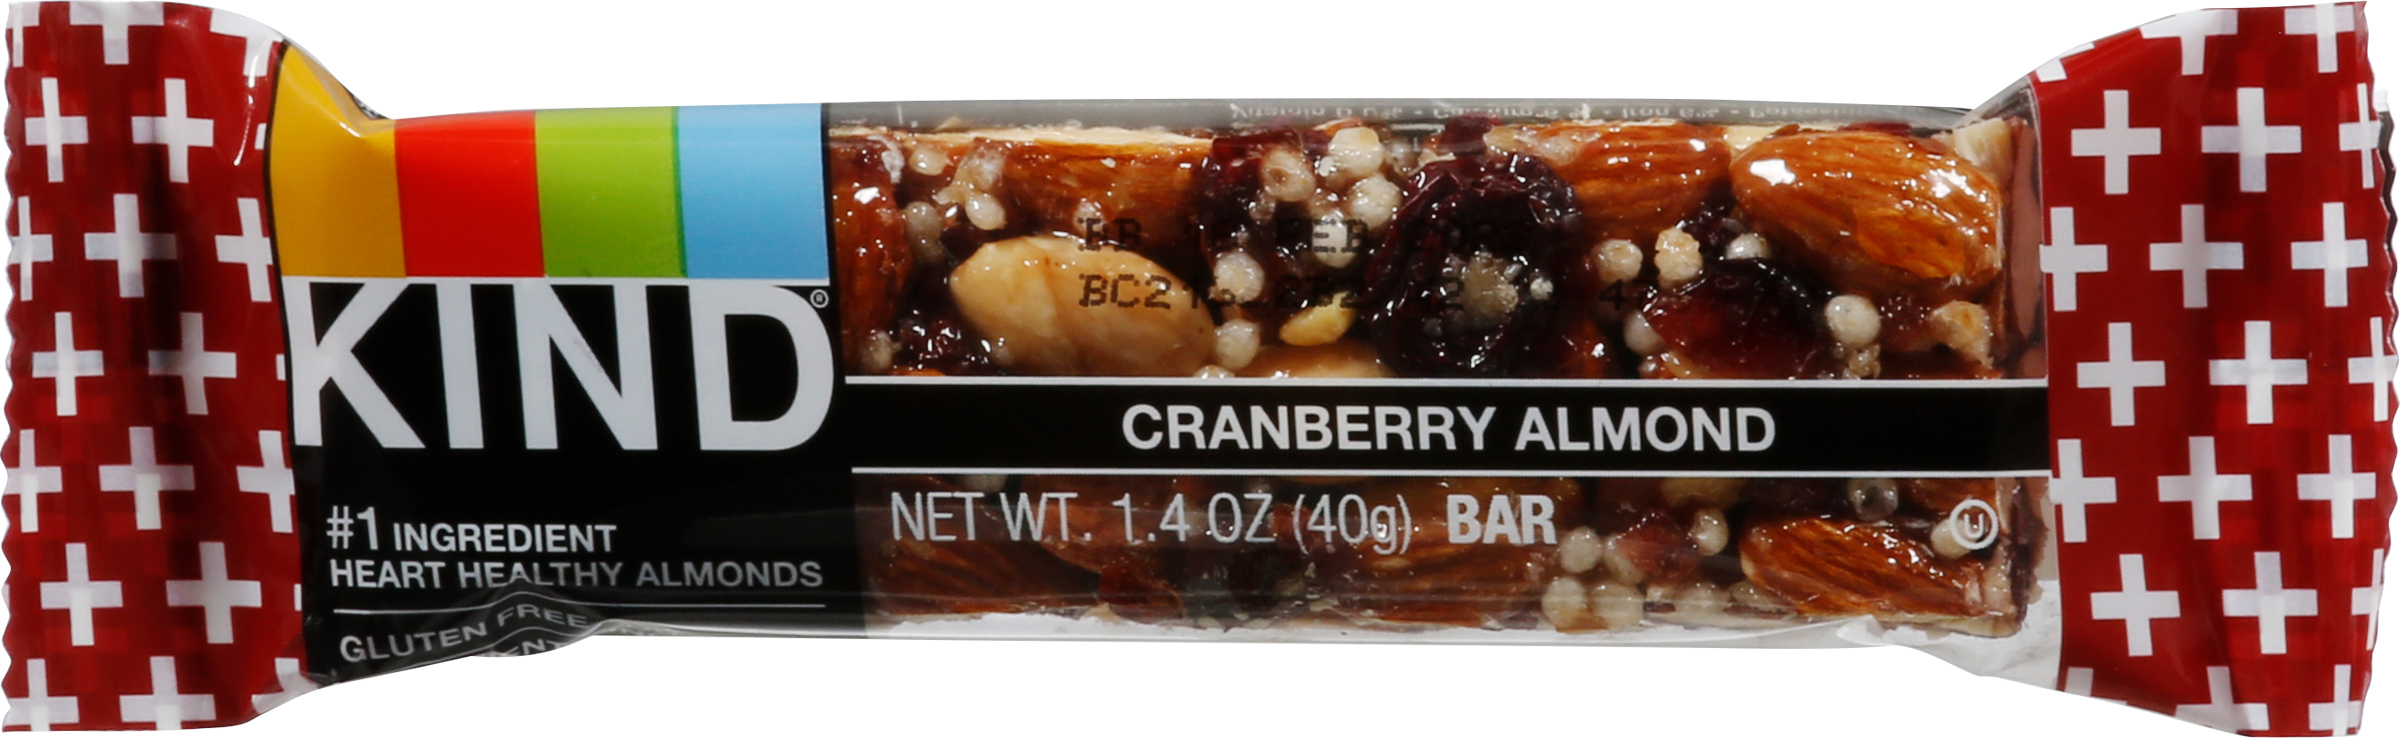 Calories in Bar, Cranberry Almond from Kind